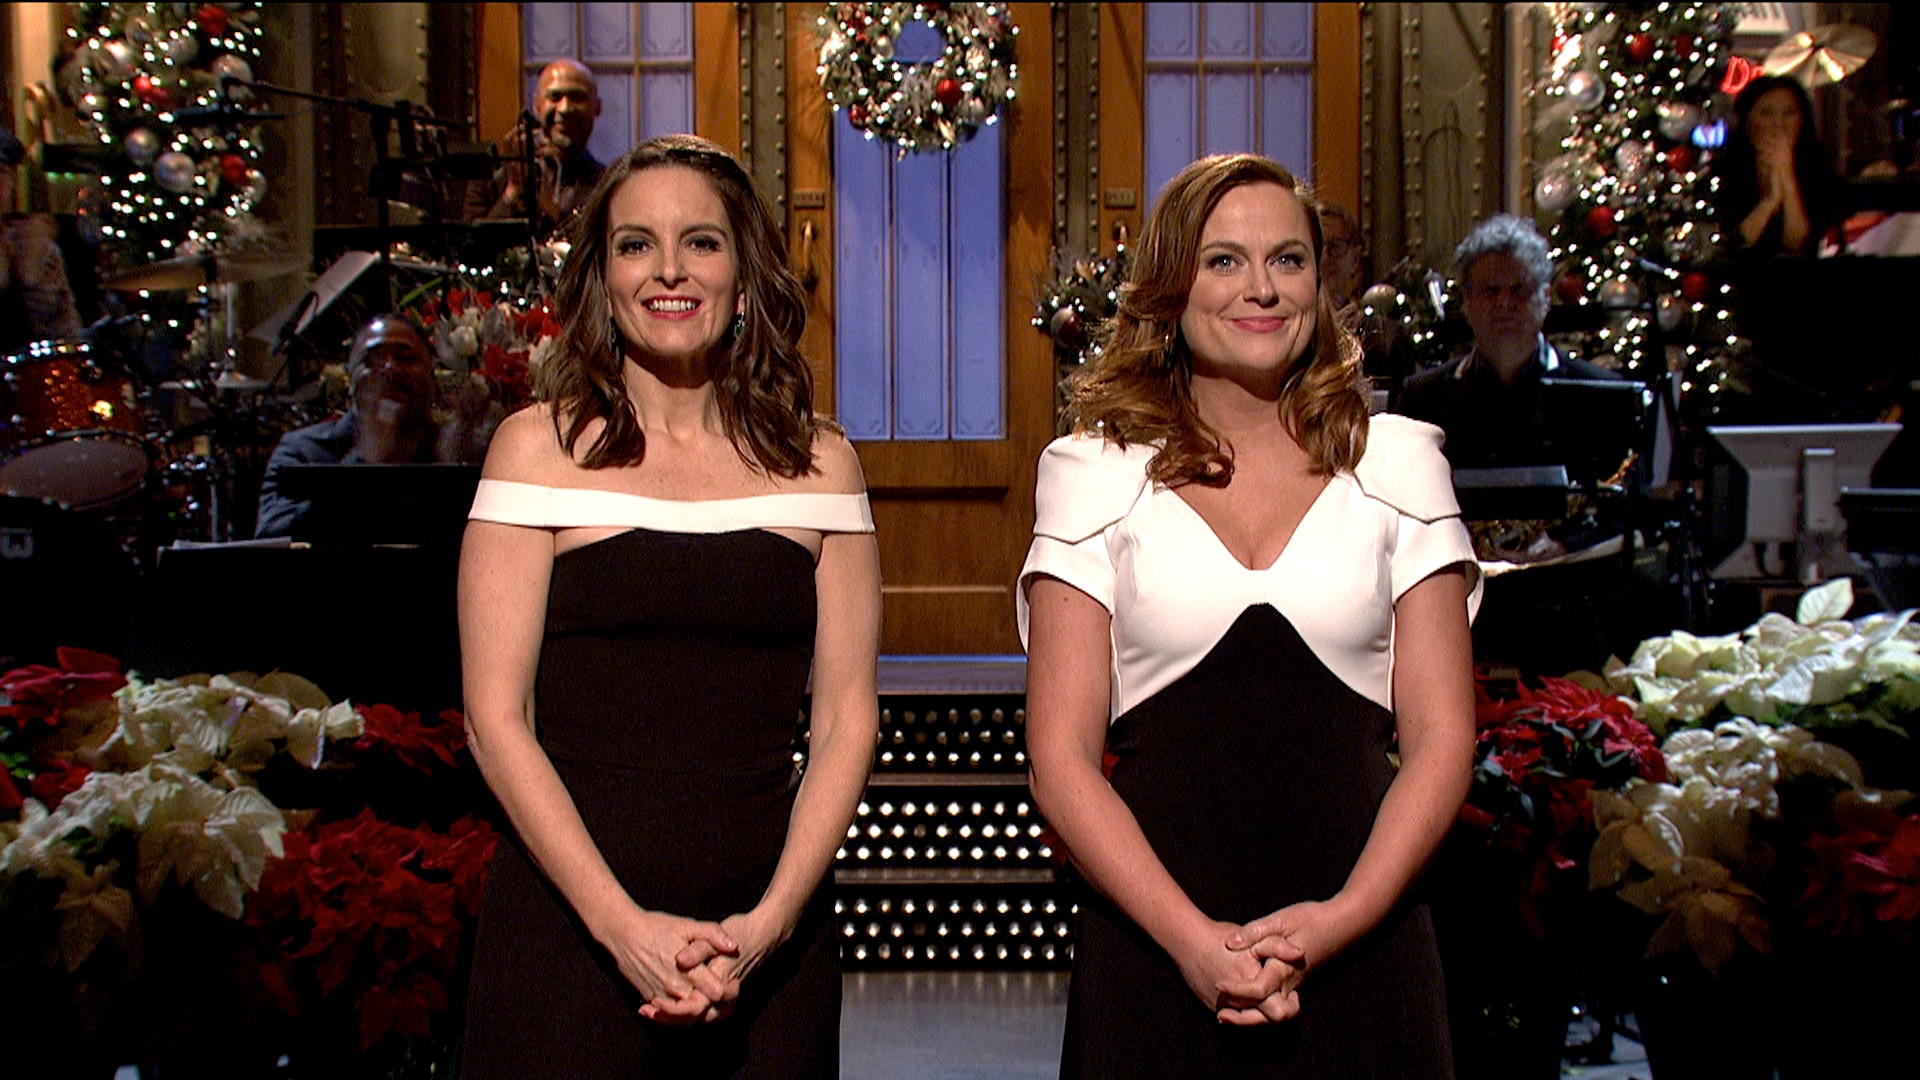 Watch Saturday Night Live Highlight Tina Fey And Amy Poehler Christmas Mash Up Monologue